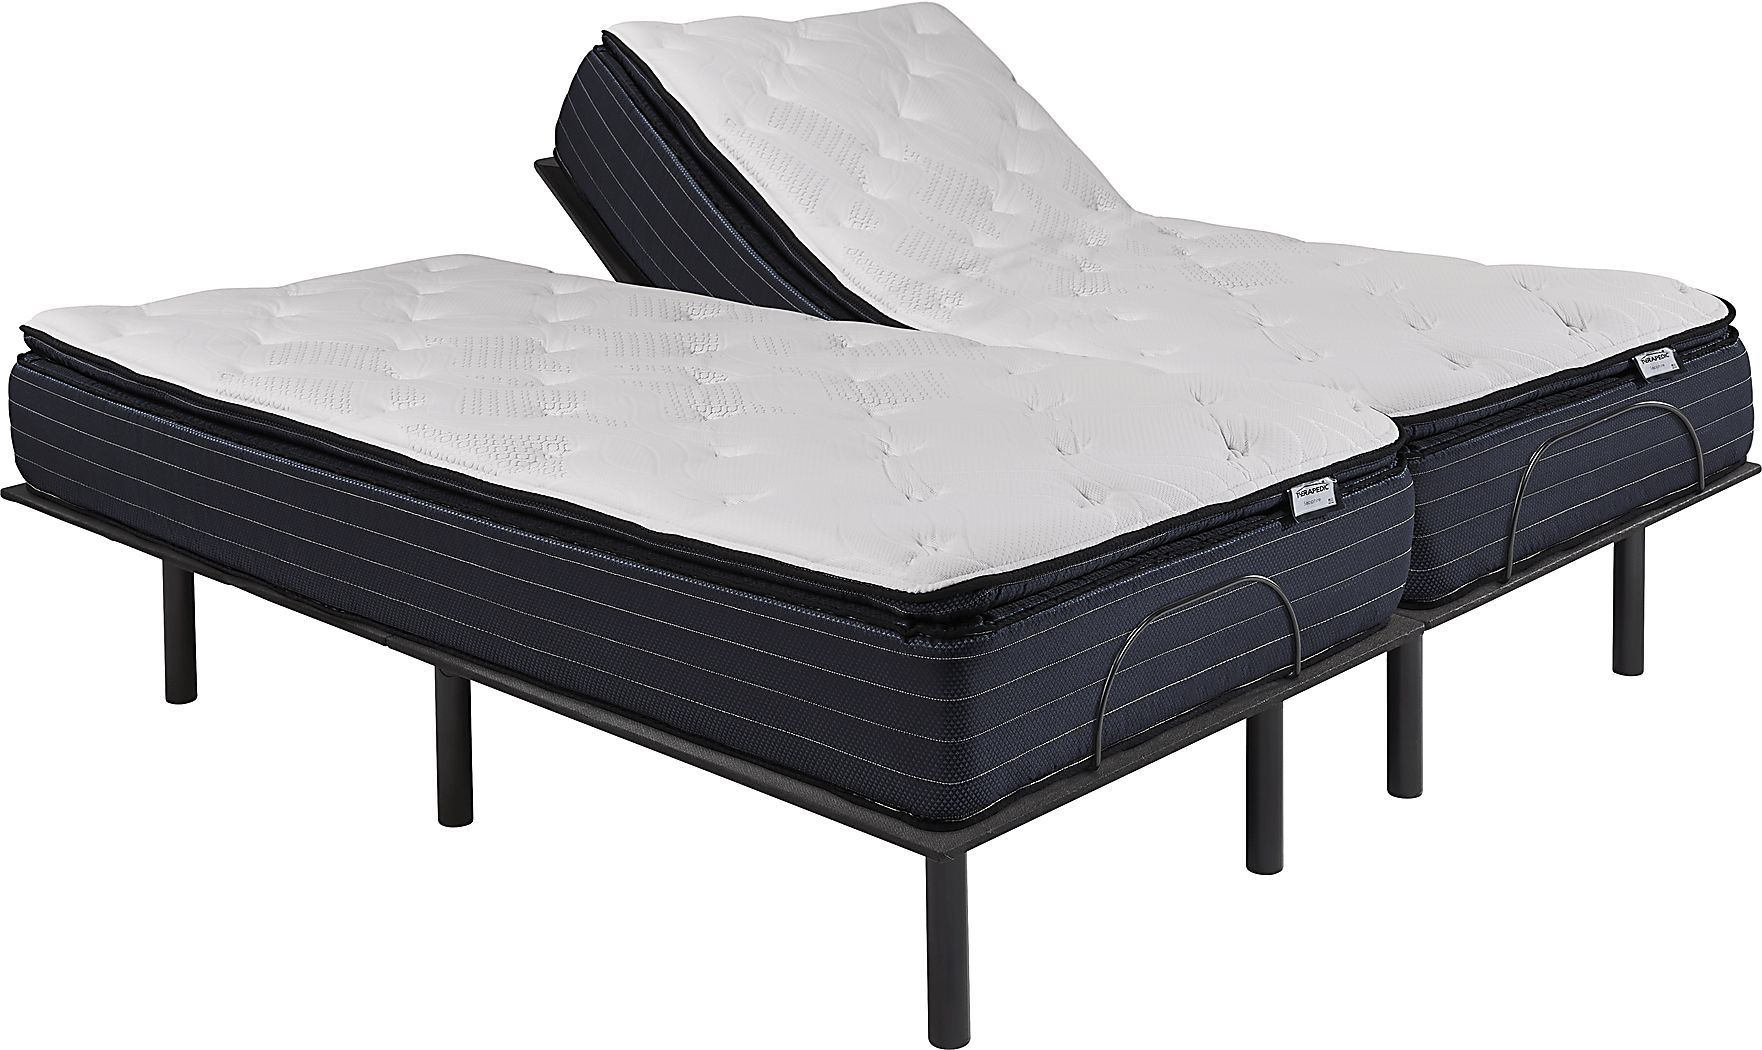 king mattress set with finances with bad credit